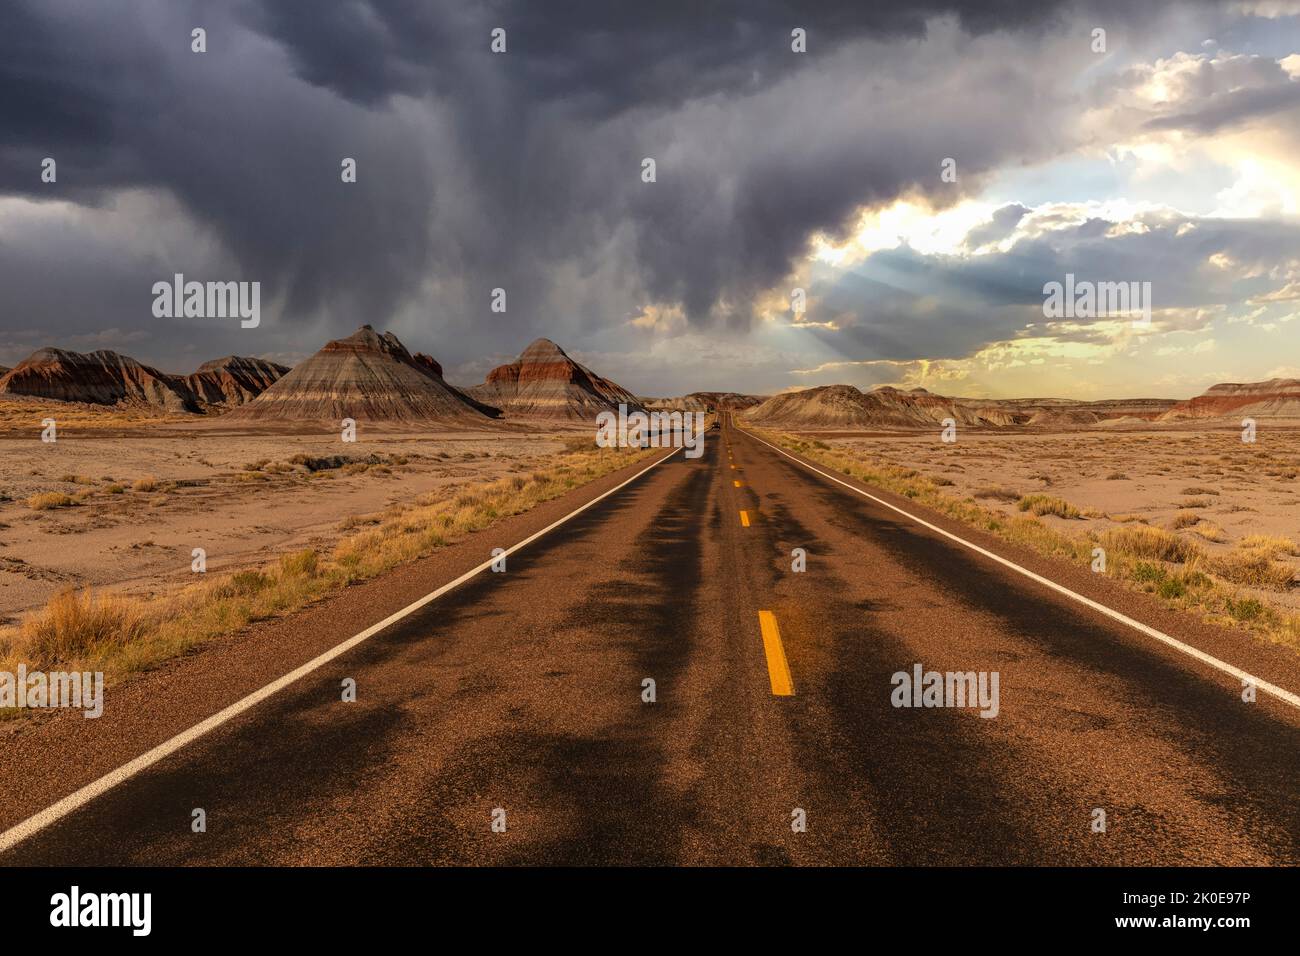 The remote roadway deep in the heart of the Petrified Forest National Park shows the beautiful mountain scenery framed against a stormy sky with rain Stock Photo